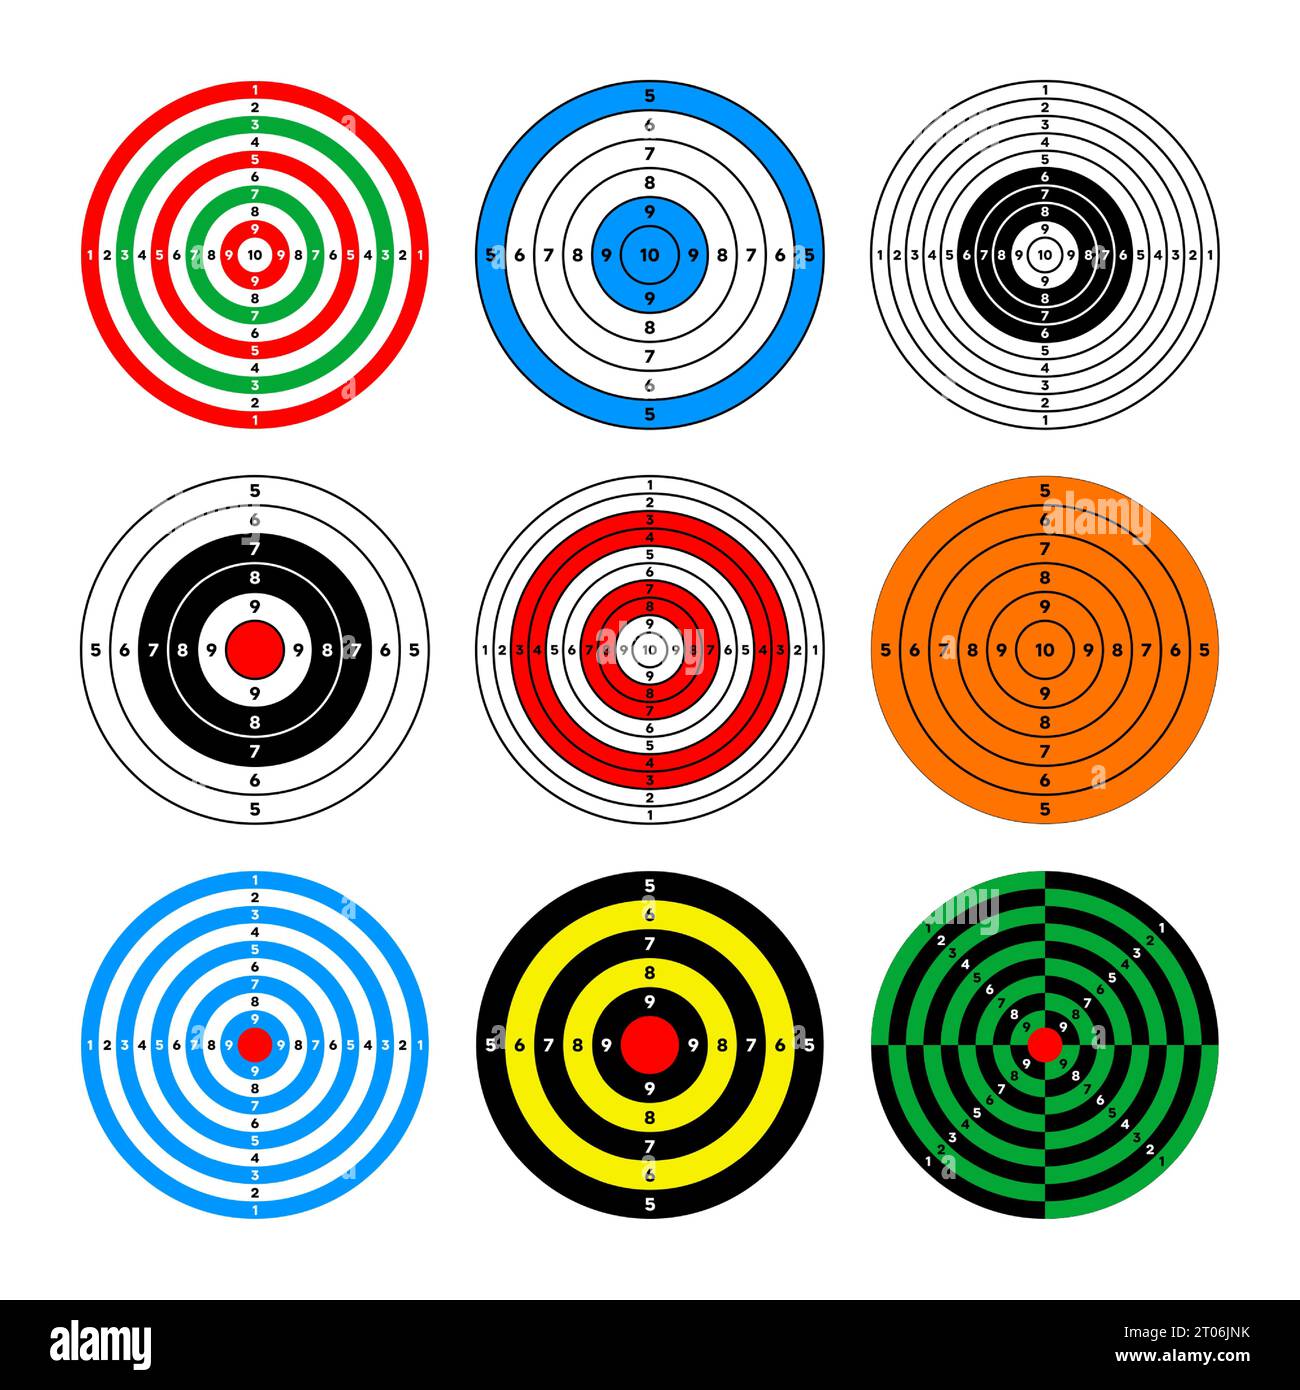 Shooting range paper targets. Round target with divisions, marks and numbers. Archery, gun shooting practise and training, sport competition and Stock Vector